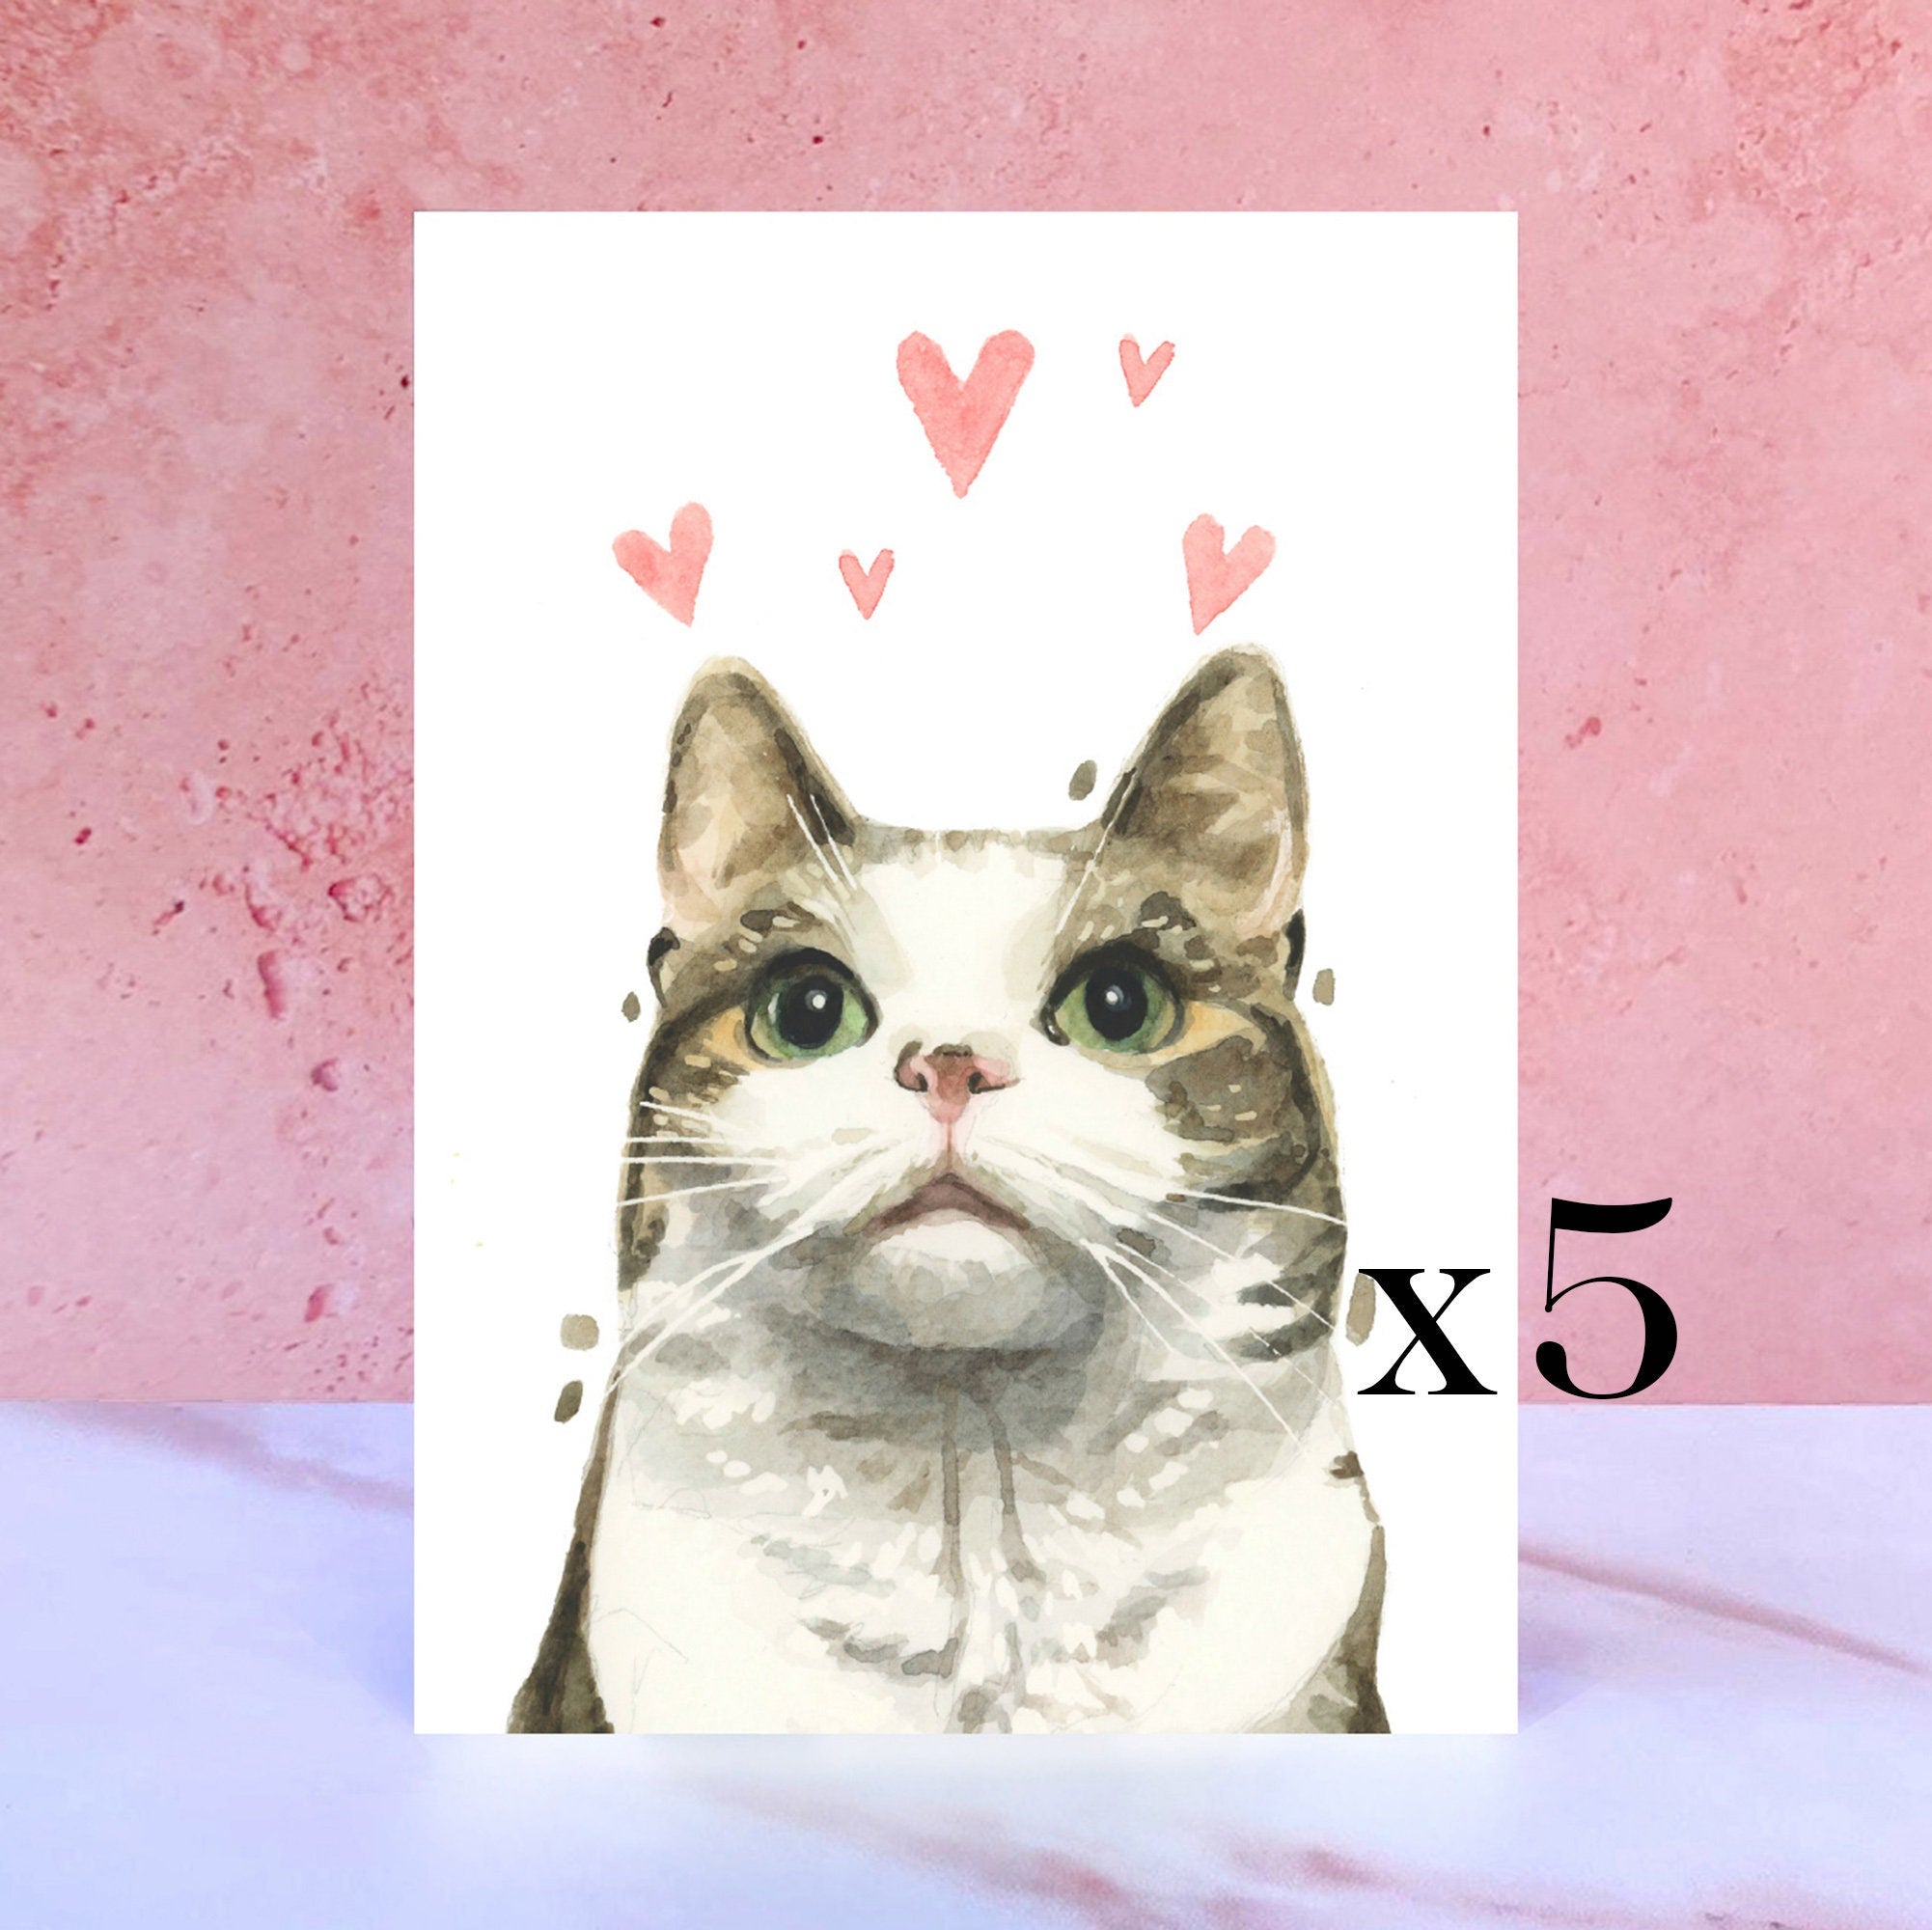 Pack of 5 Tabby and White Cat Licks & Kisses Card for Valentines, Anniversaries and from the Cat